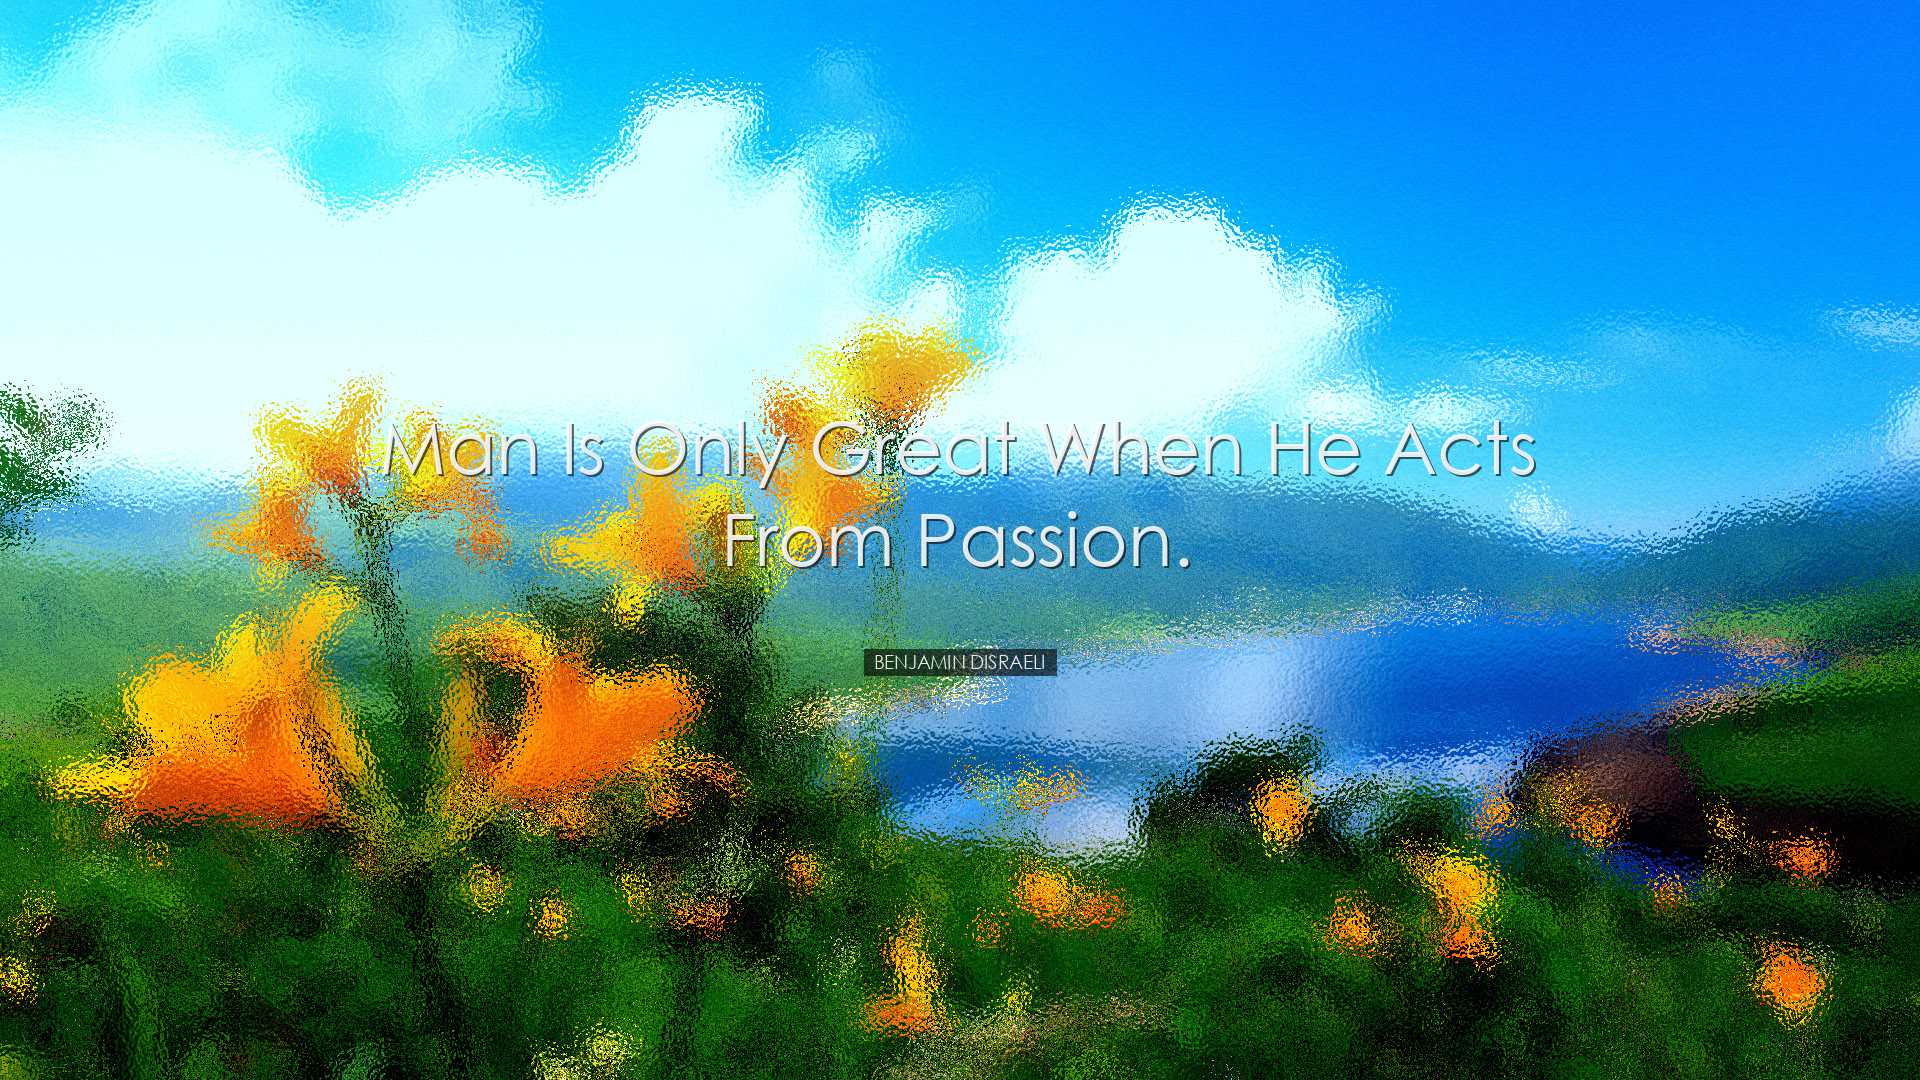 Man is only great when he acts from passion. - Benjamin Disraeli